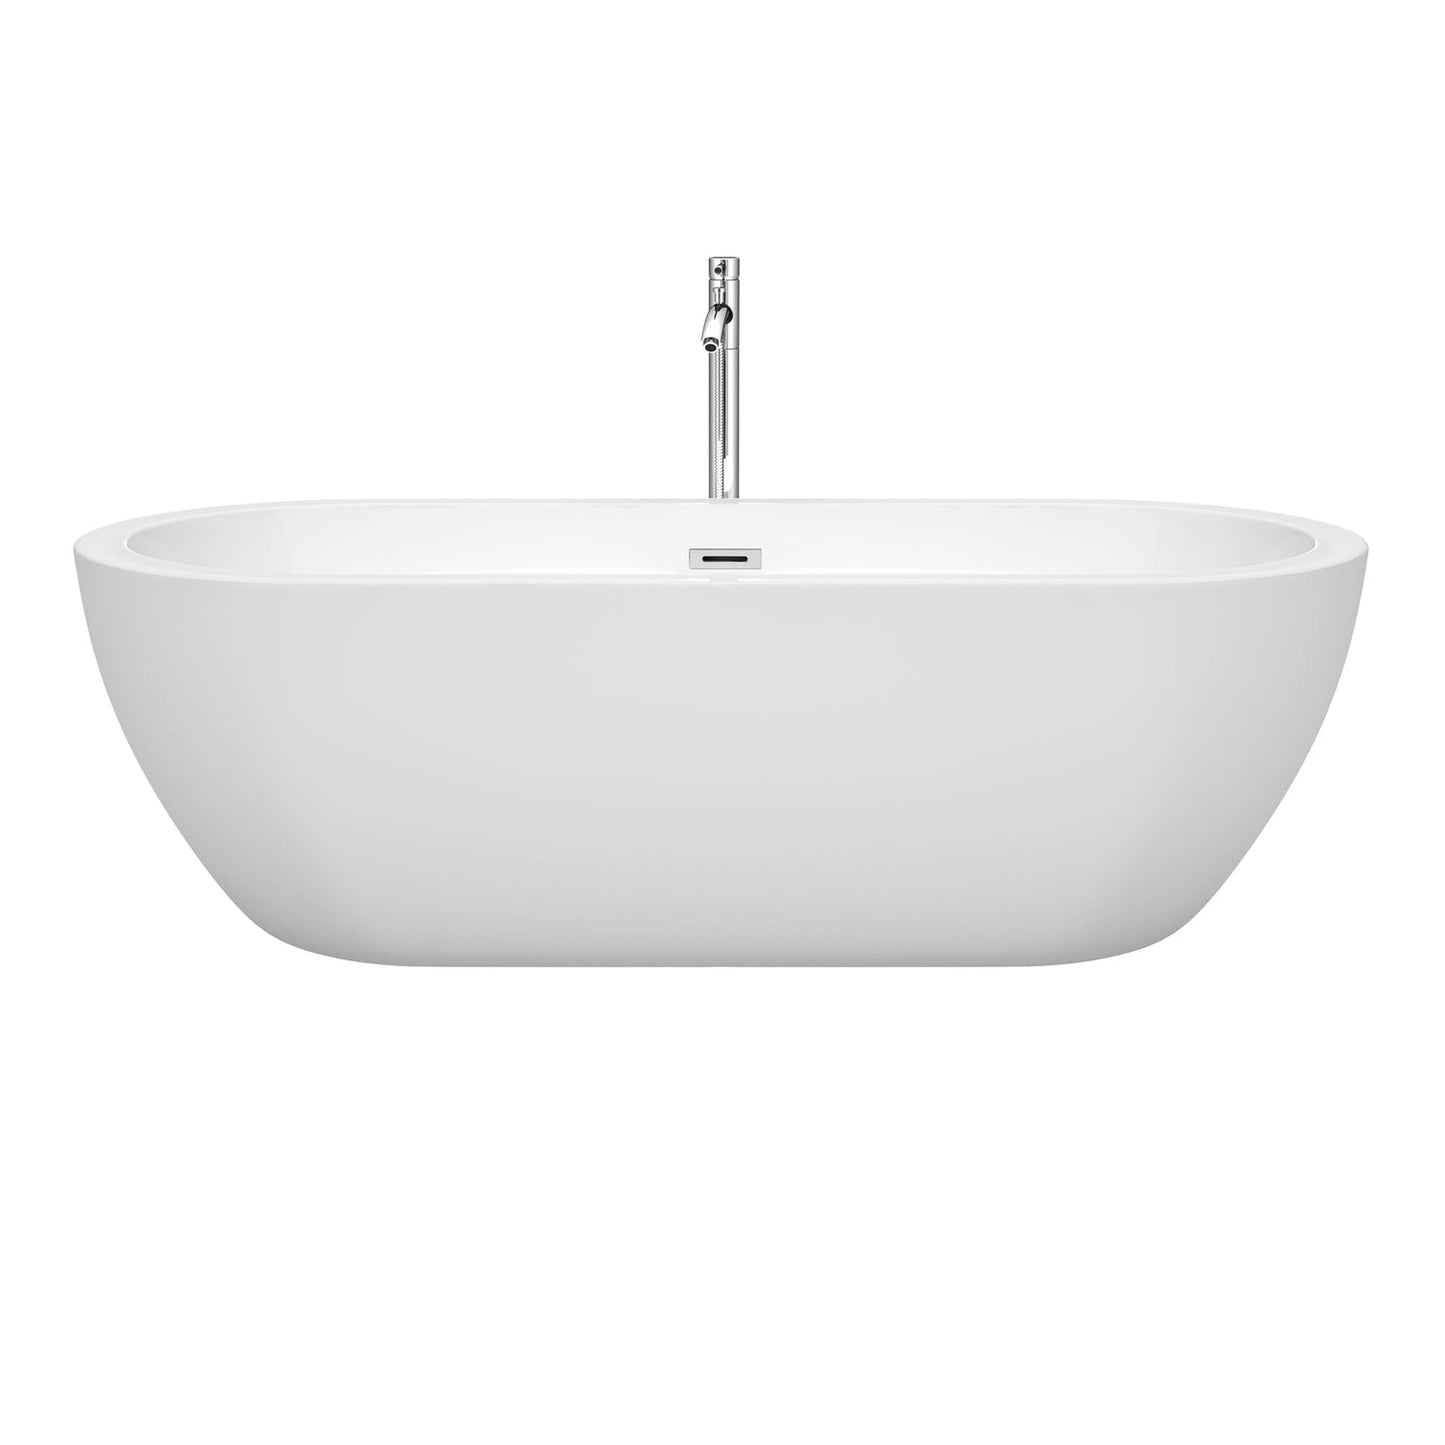 Wyndham Collection Soho 72" Freestanding Bathtub in White With Floor Mounted Faucet, Drain and Overflow Trim in Polished Chrome